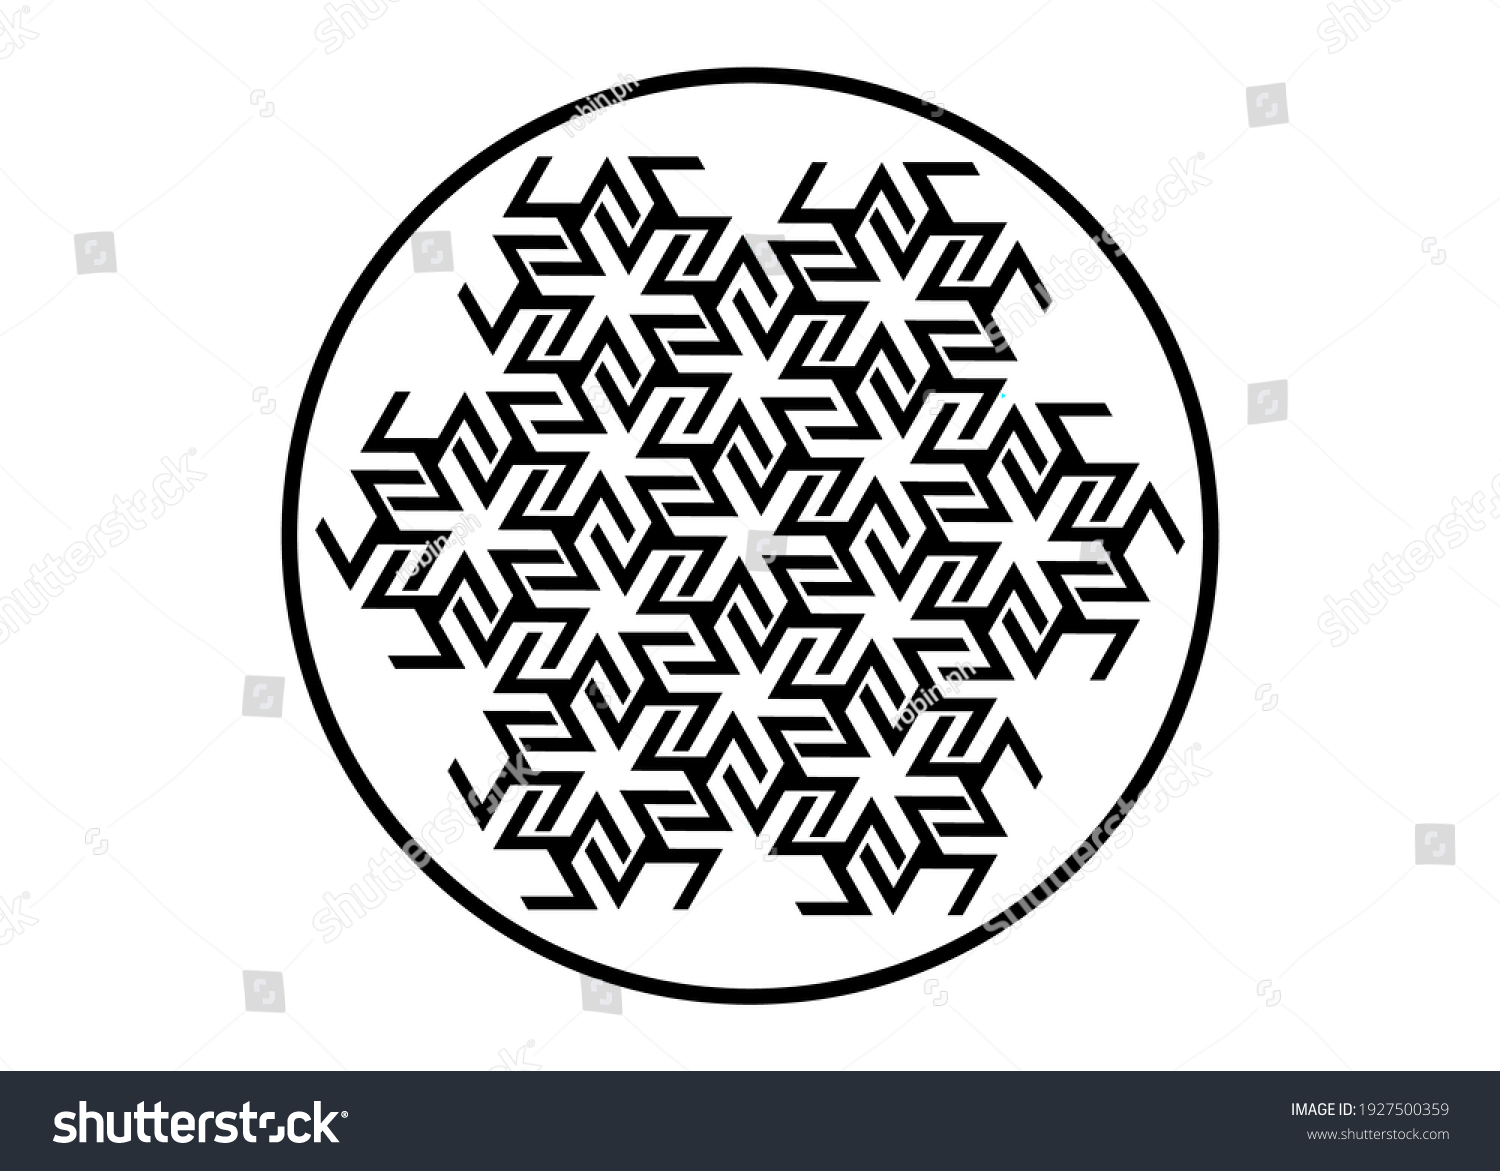 SVG of Antahkarana Mandala ancient symbol of Healing and Meditation, used in Tibet and China. Sacred Geometry, mystic sign for Reiki, Radionics, beneficial effects on the chakras, healing energies. Isolated svg